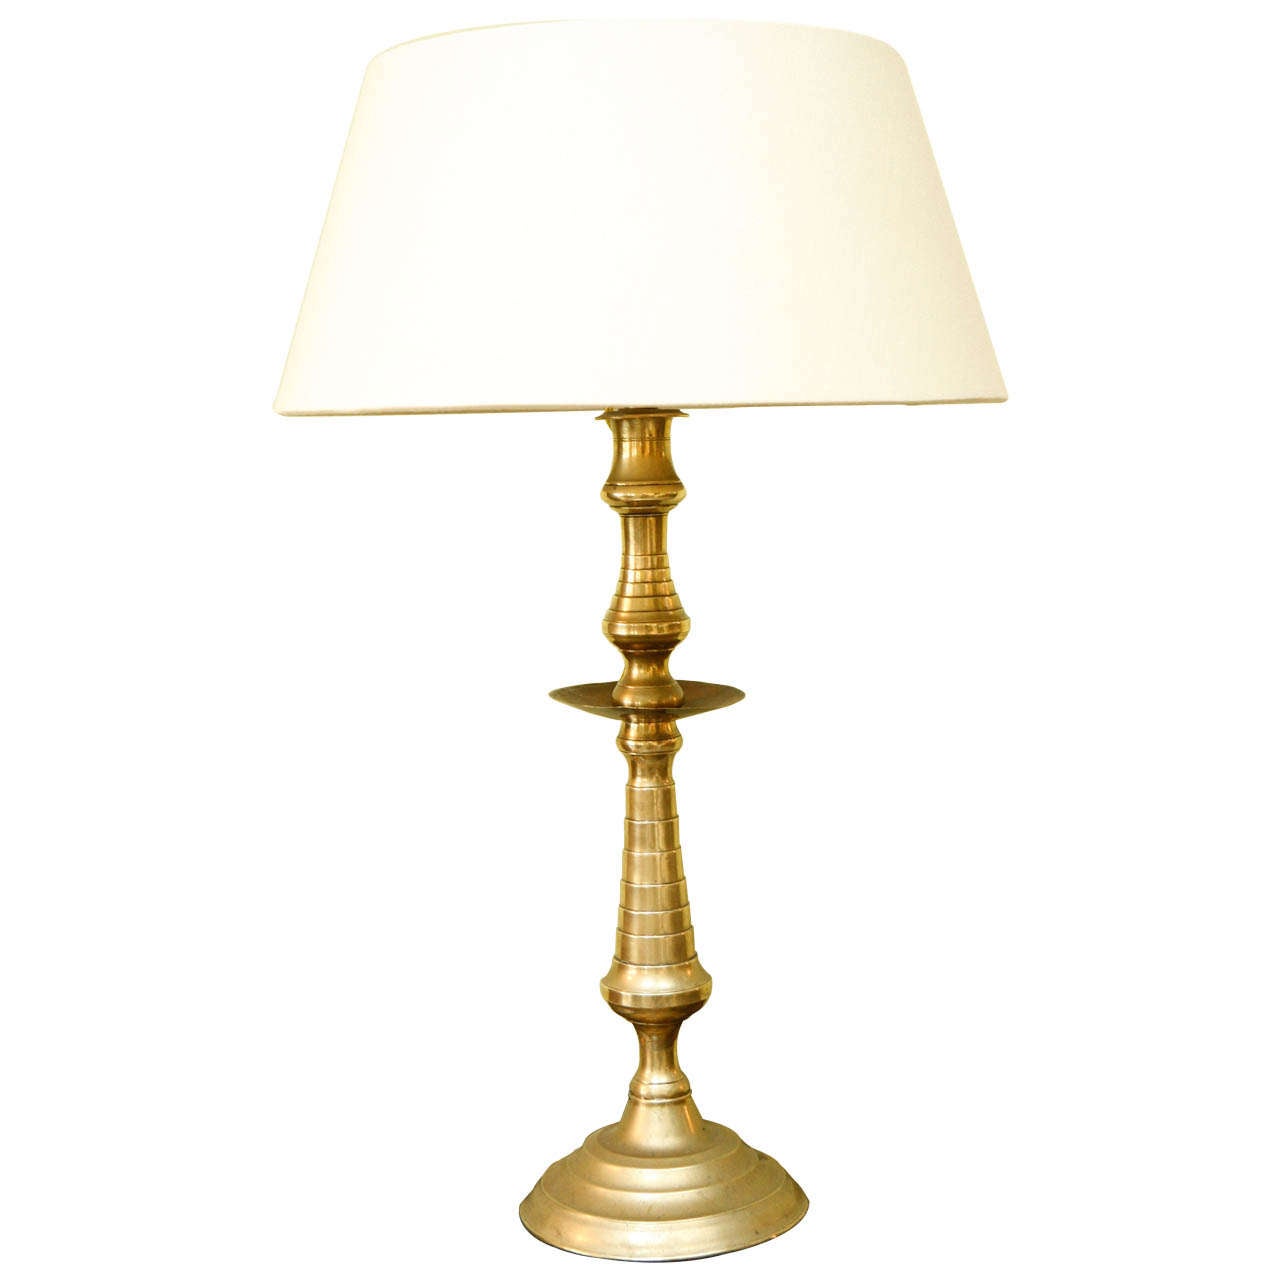 A Continental Brass Candlestick, Early 19th C., Now Wired As A Lamp